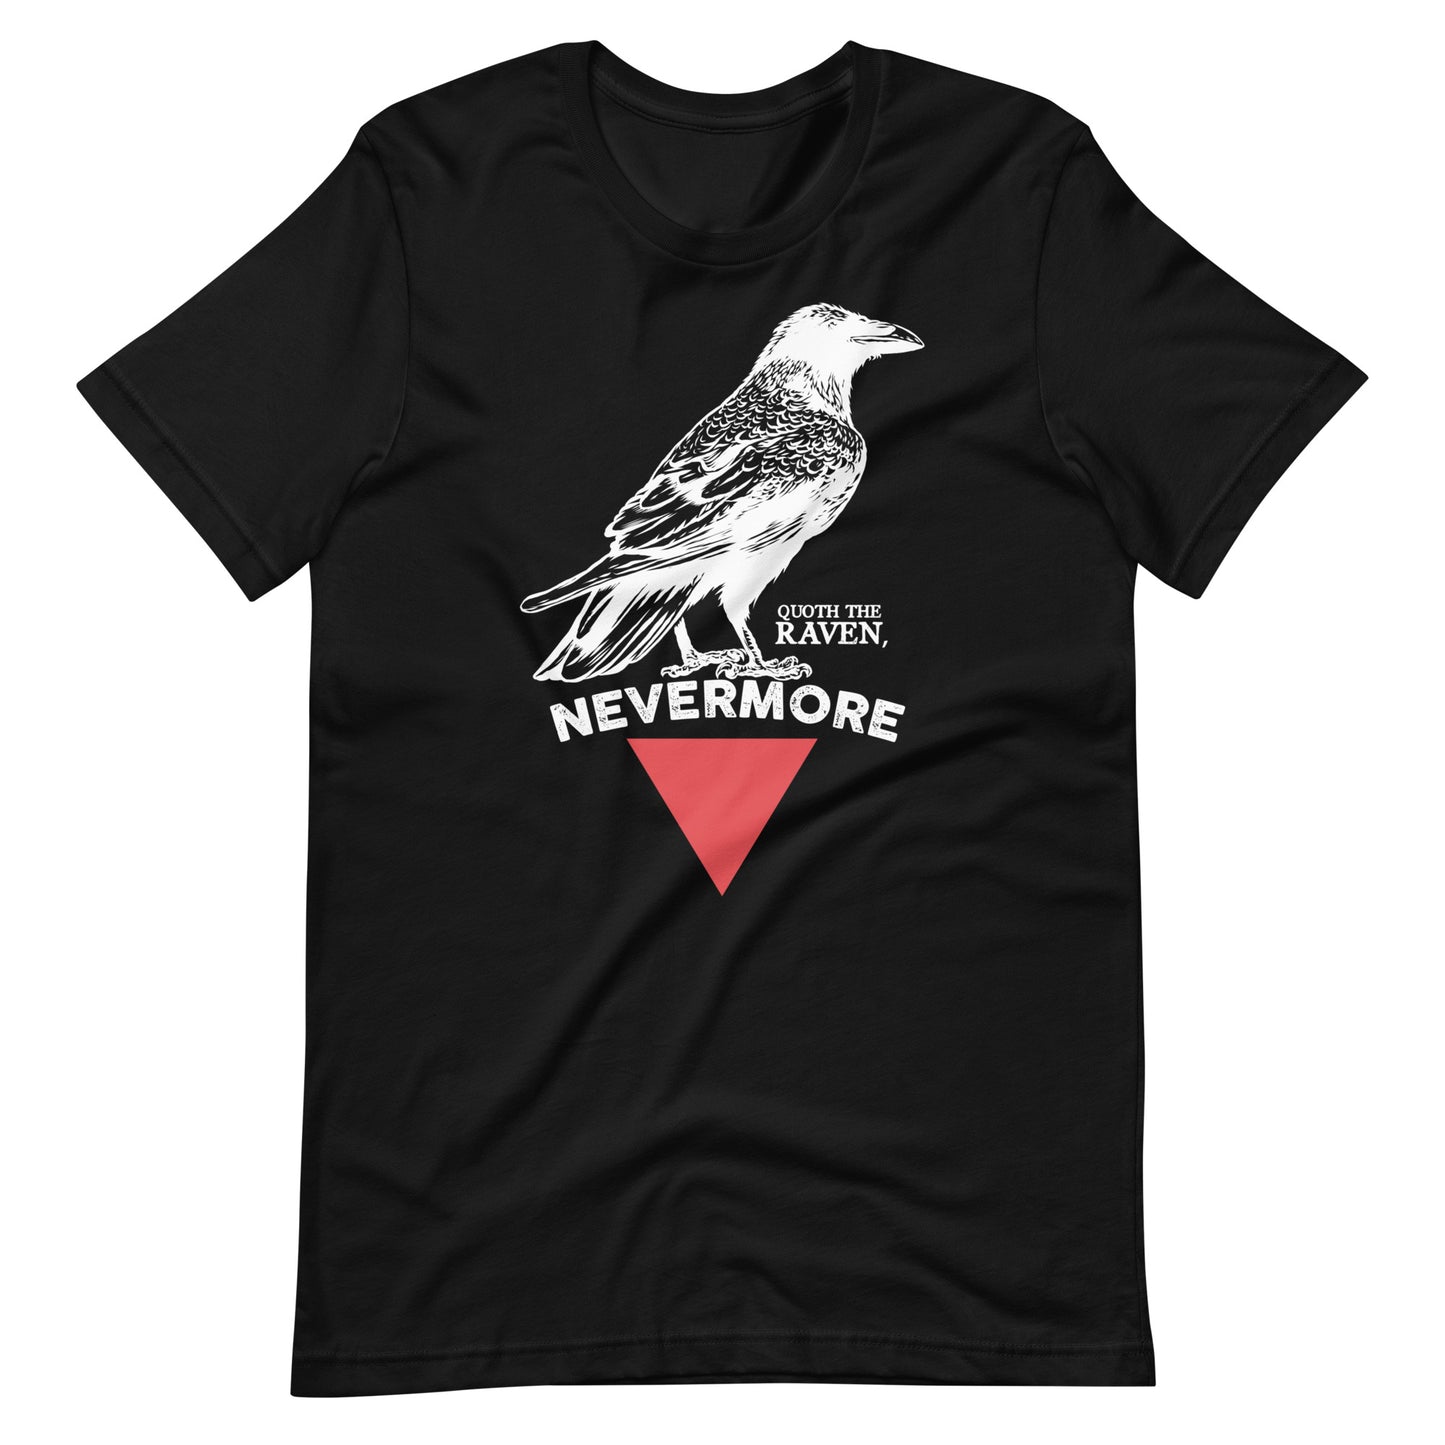 The Raven Nevermore Triangle - Men's t-shirt - Black Front